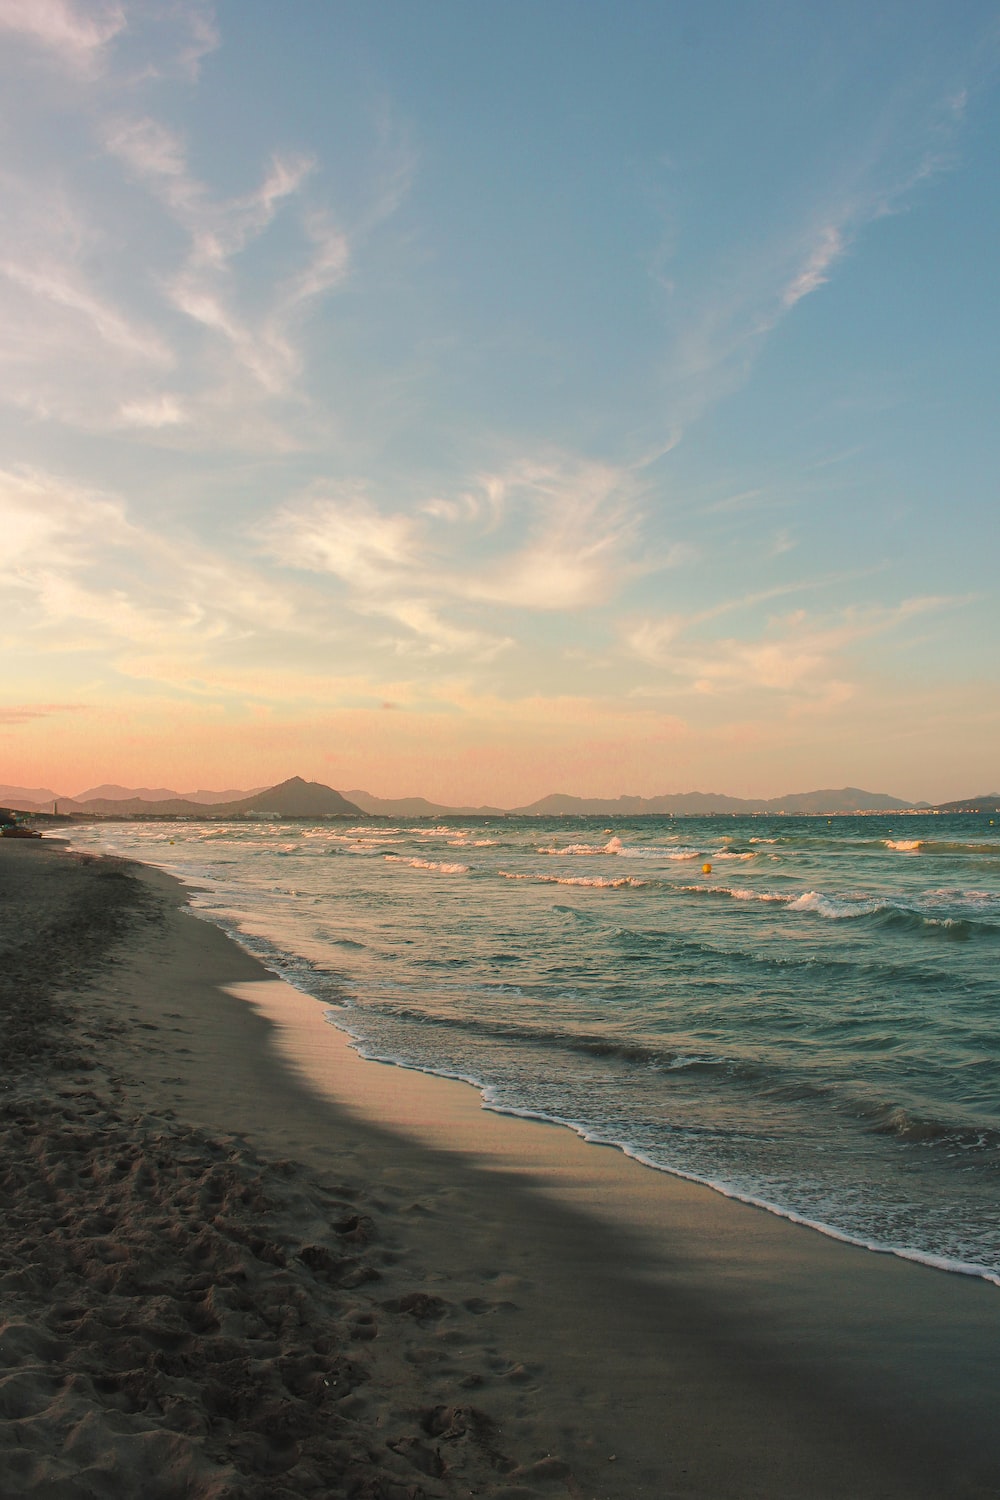 Spain Beach Picture. Download Free Image